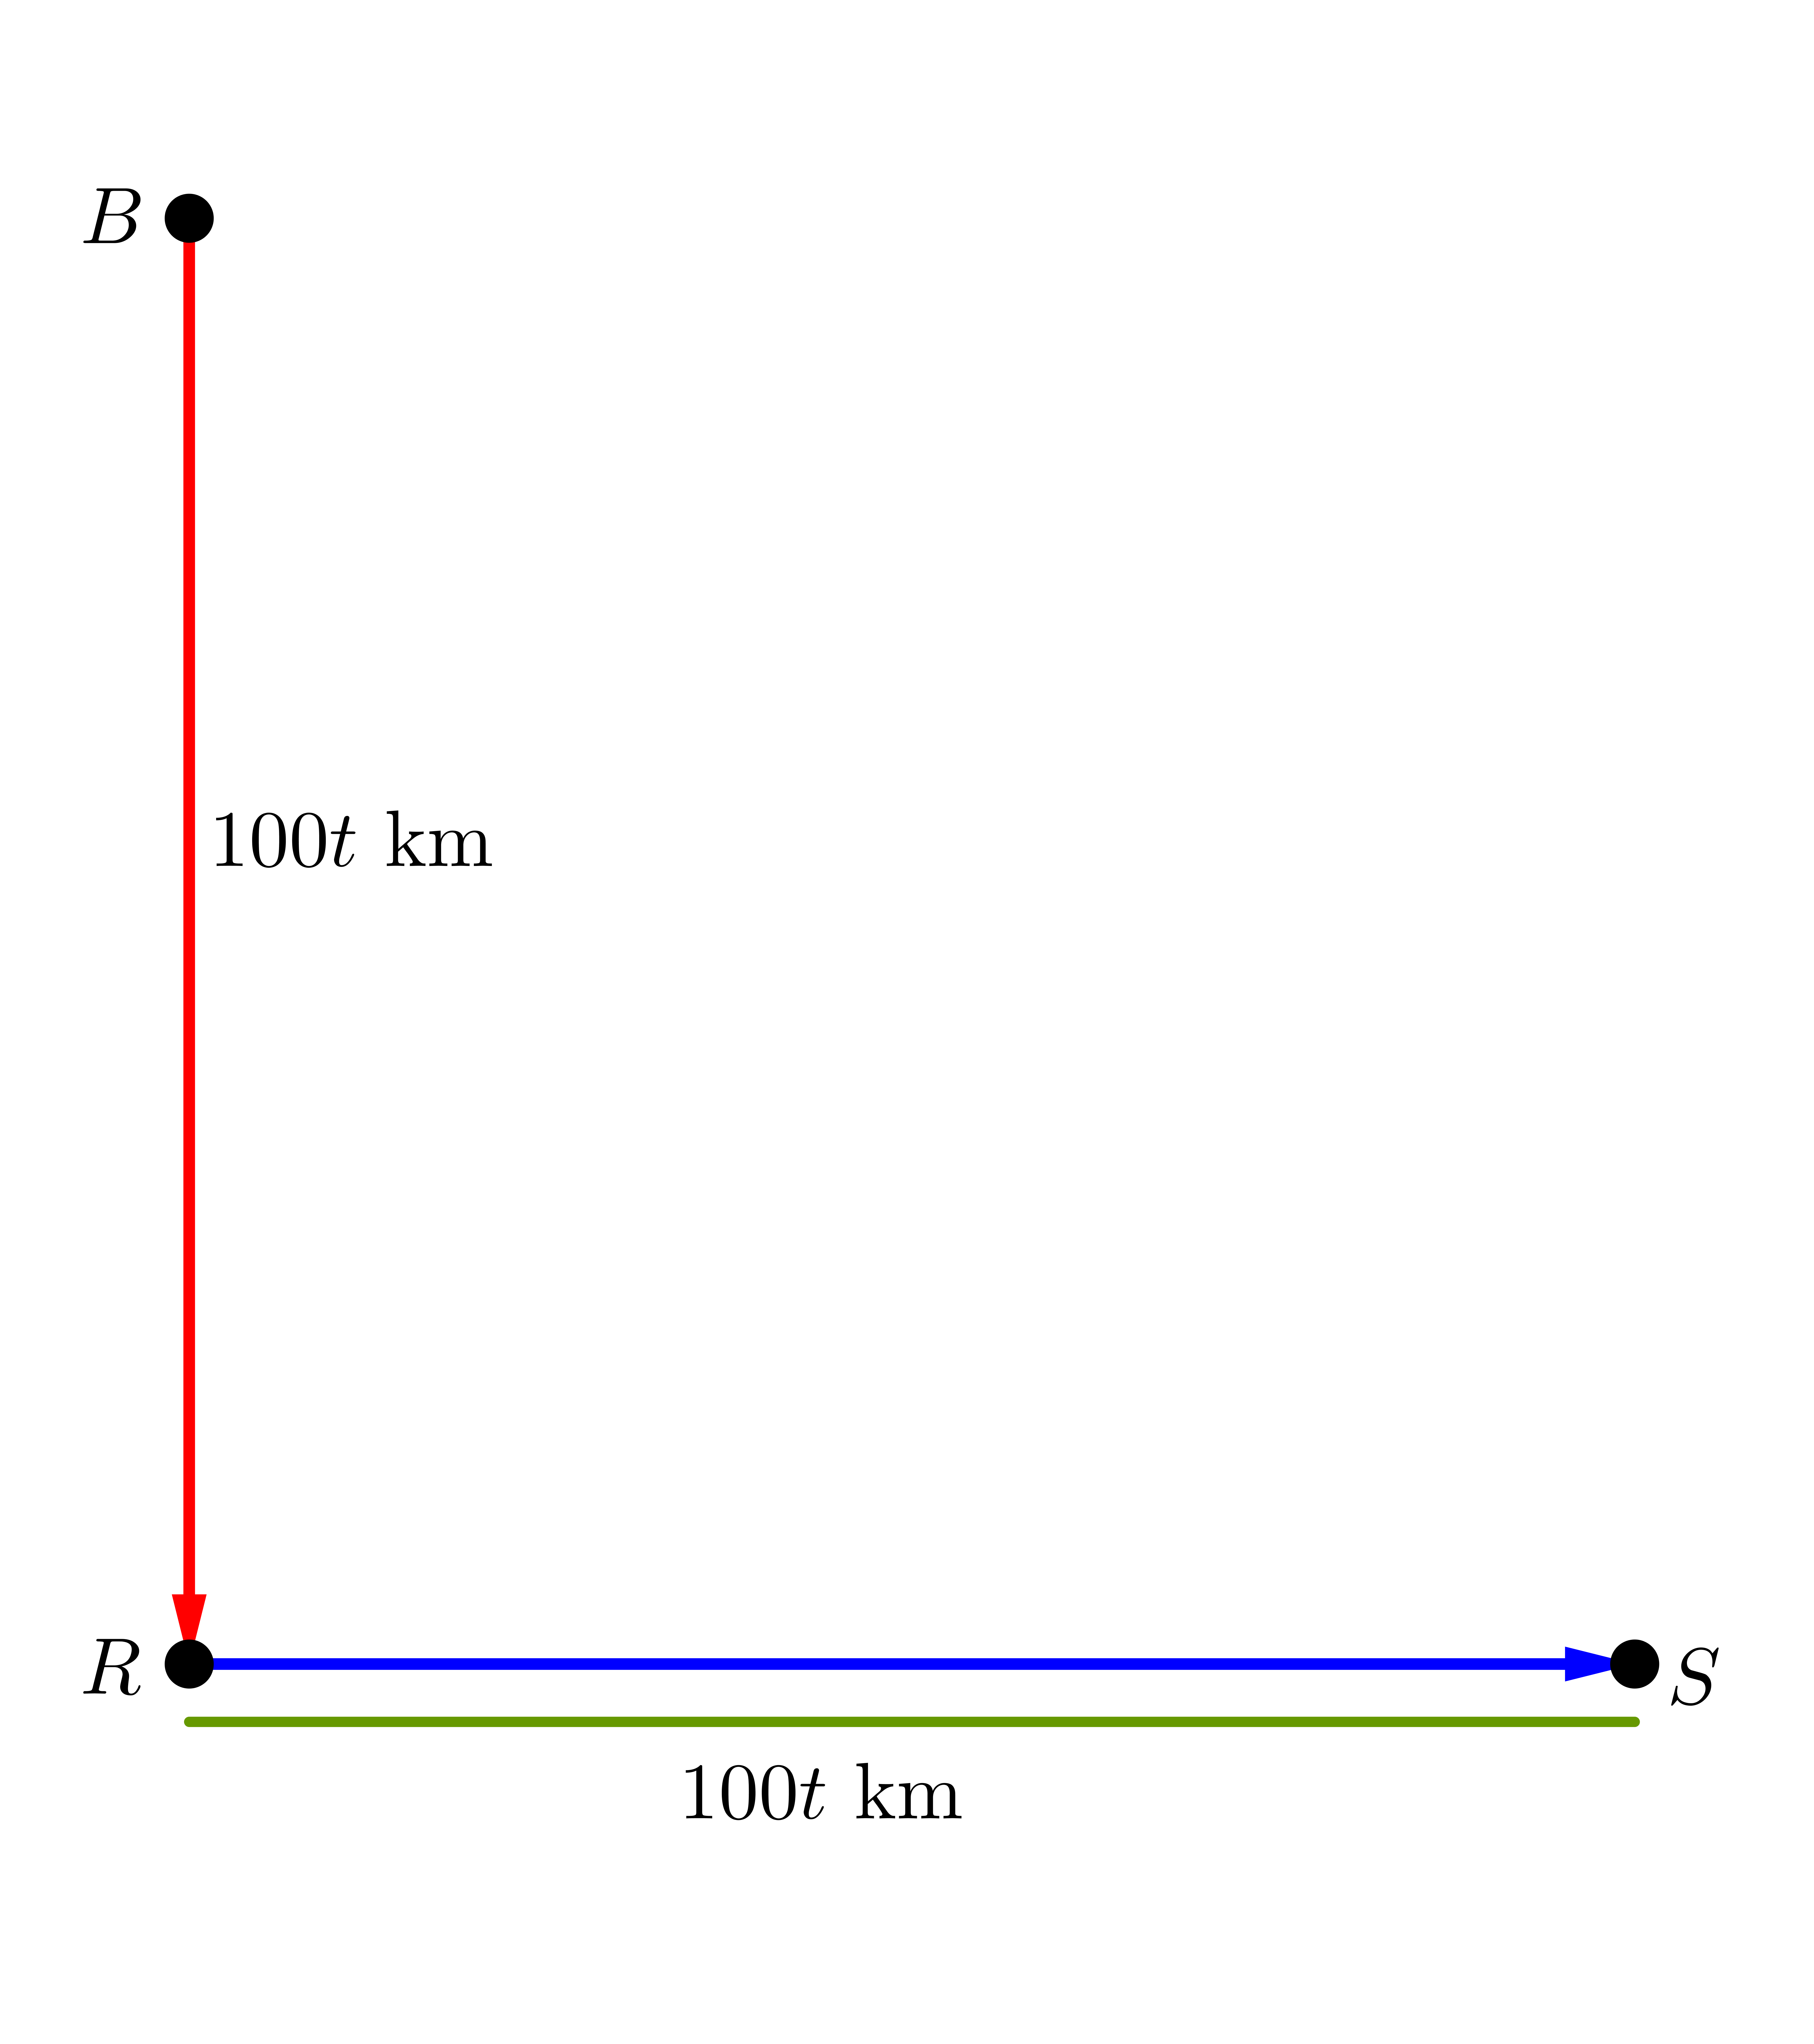 An arrow of length 100t km points south from B to R. An arrow of length 100t km points east from R to S.